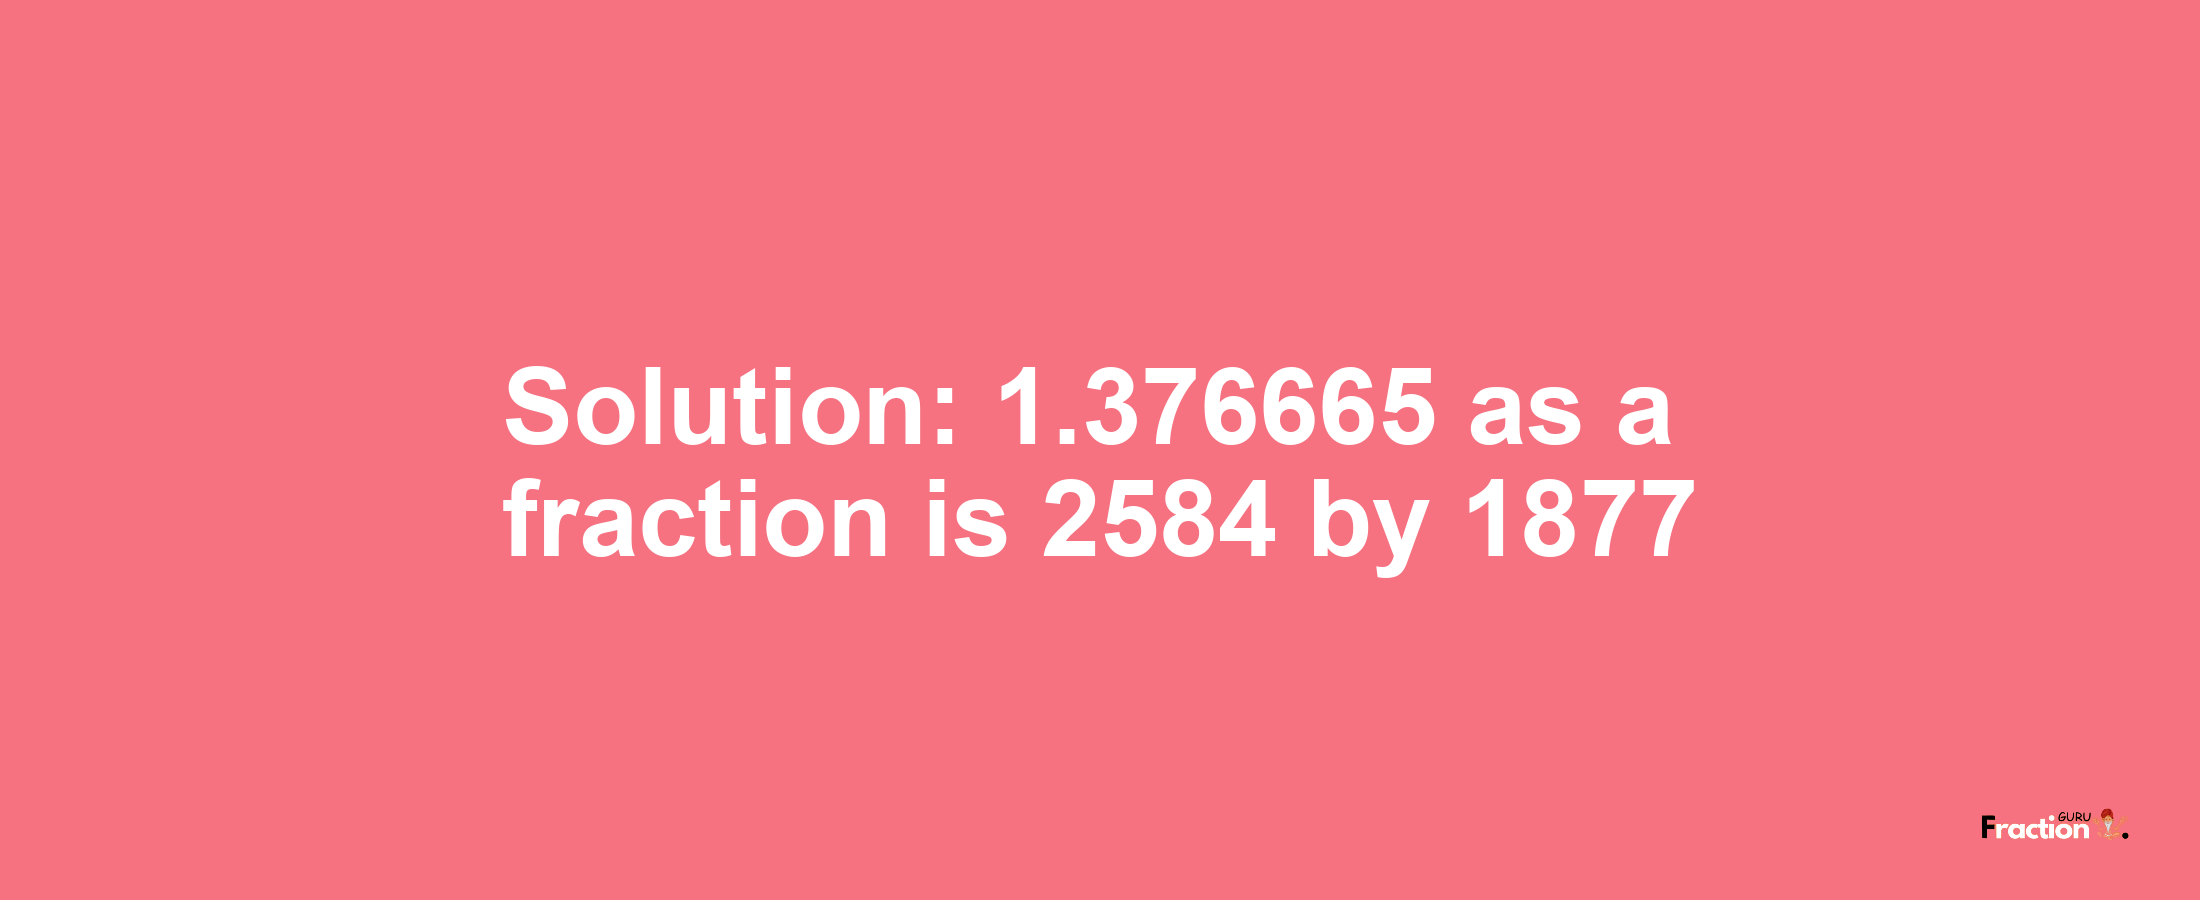 Solution:1.376665 as a fraction is 2584/1877